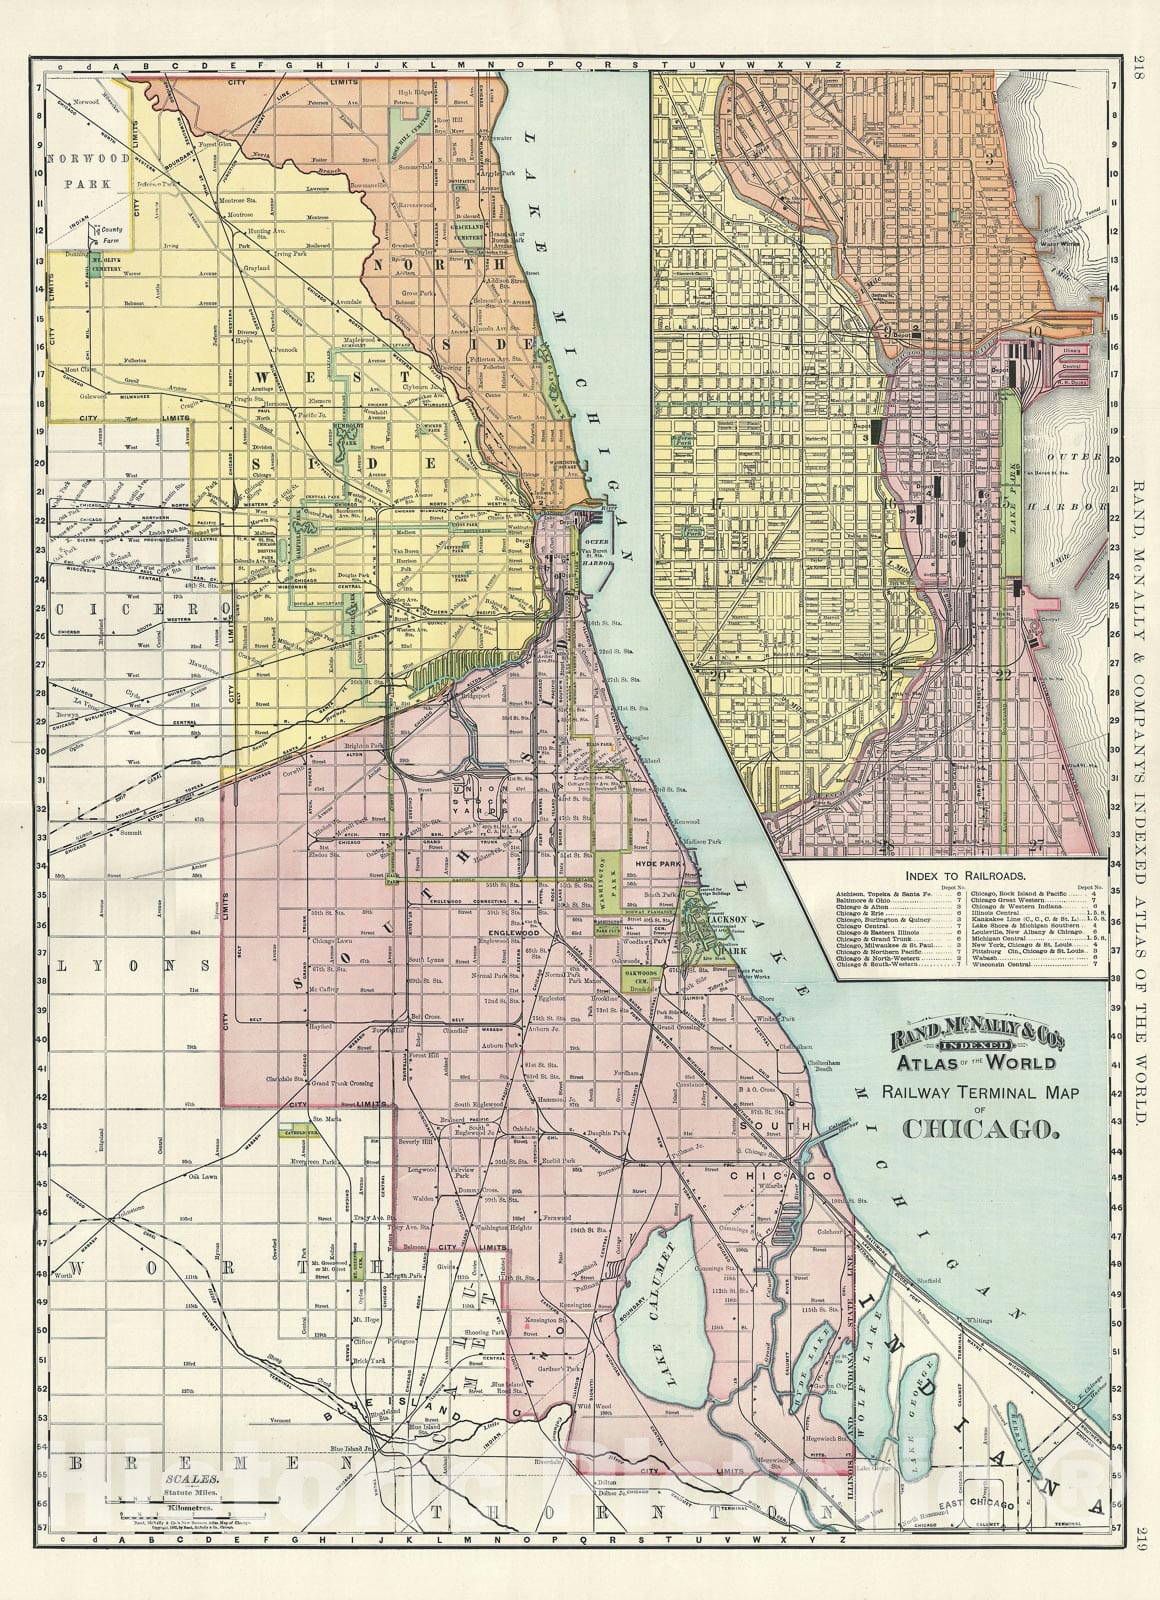 Historic Map : Plan of Chicago, Illinois "showing Railway Terminals", Rand McNally, 1892, Vintage Wall Art